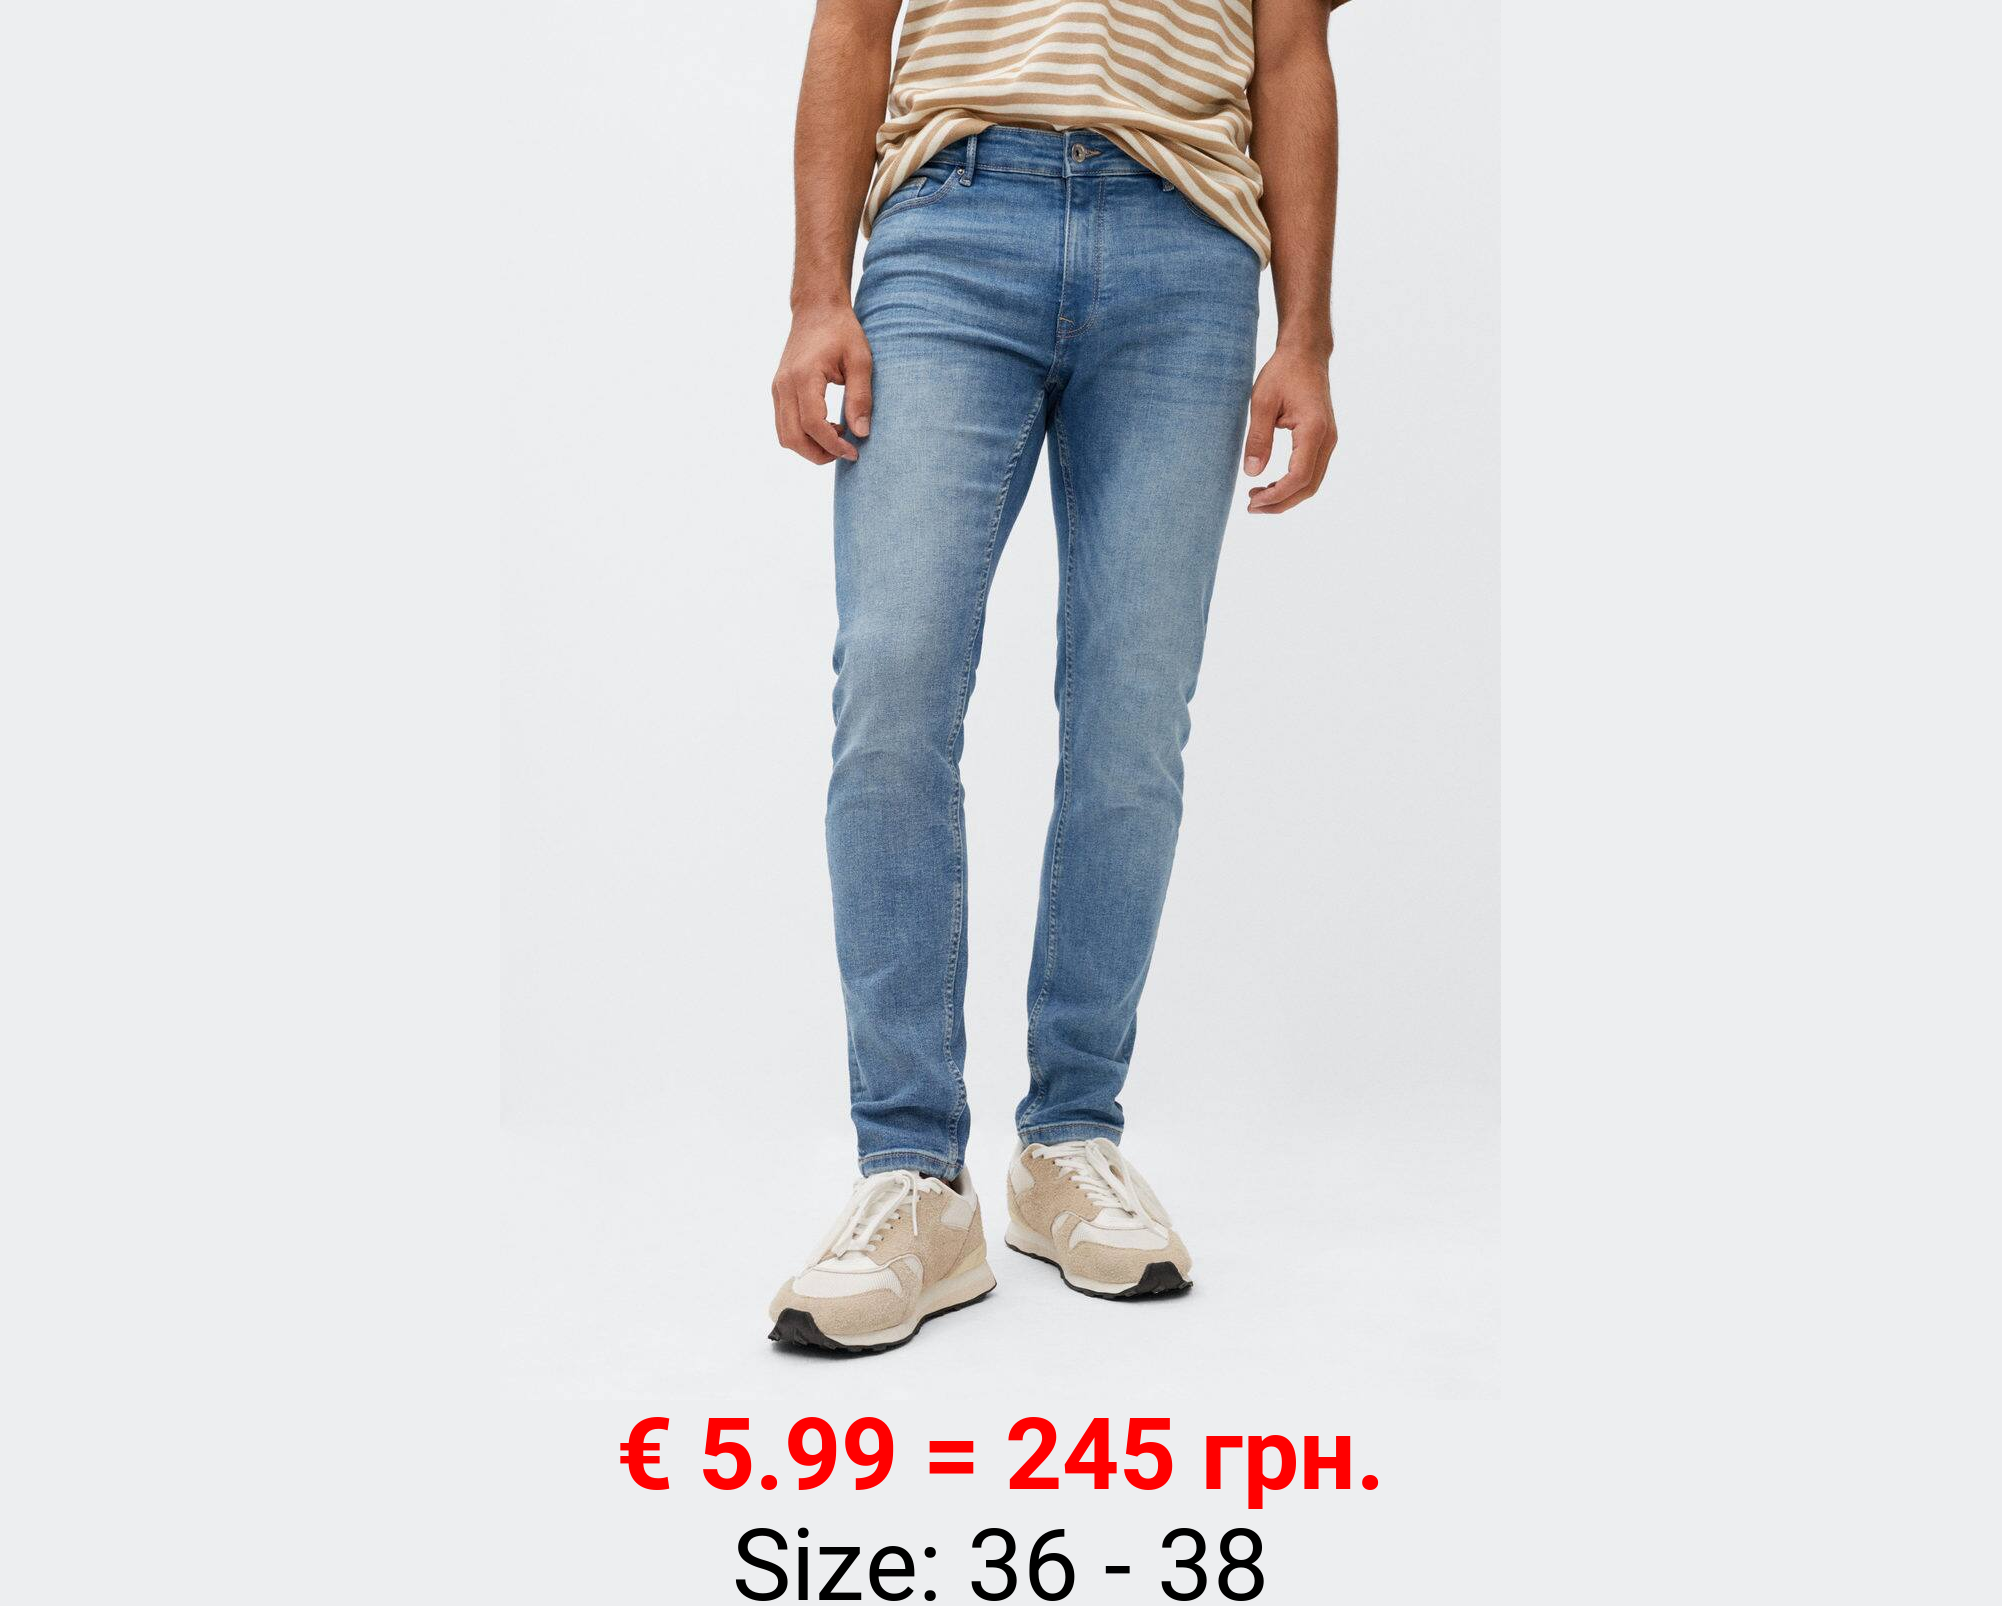 Jeans jude skinny fit